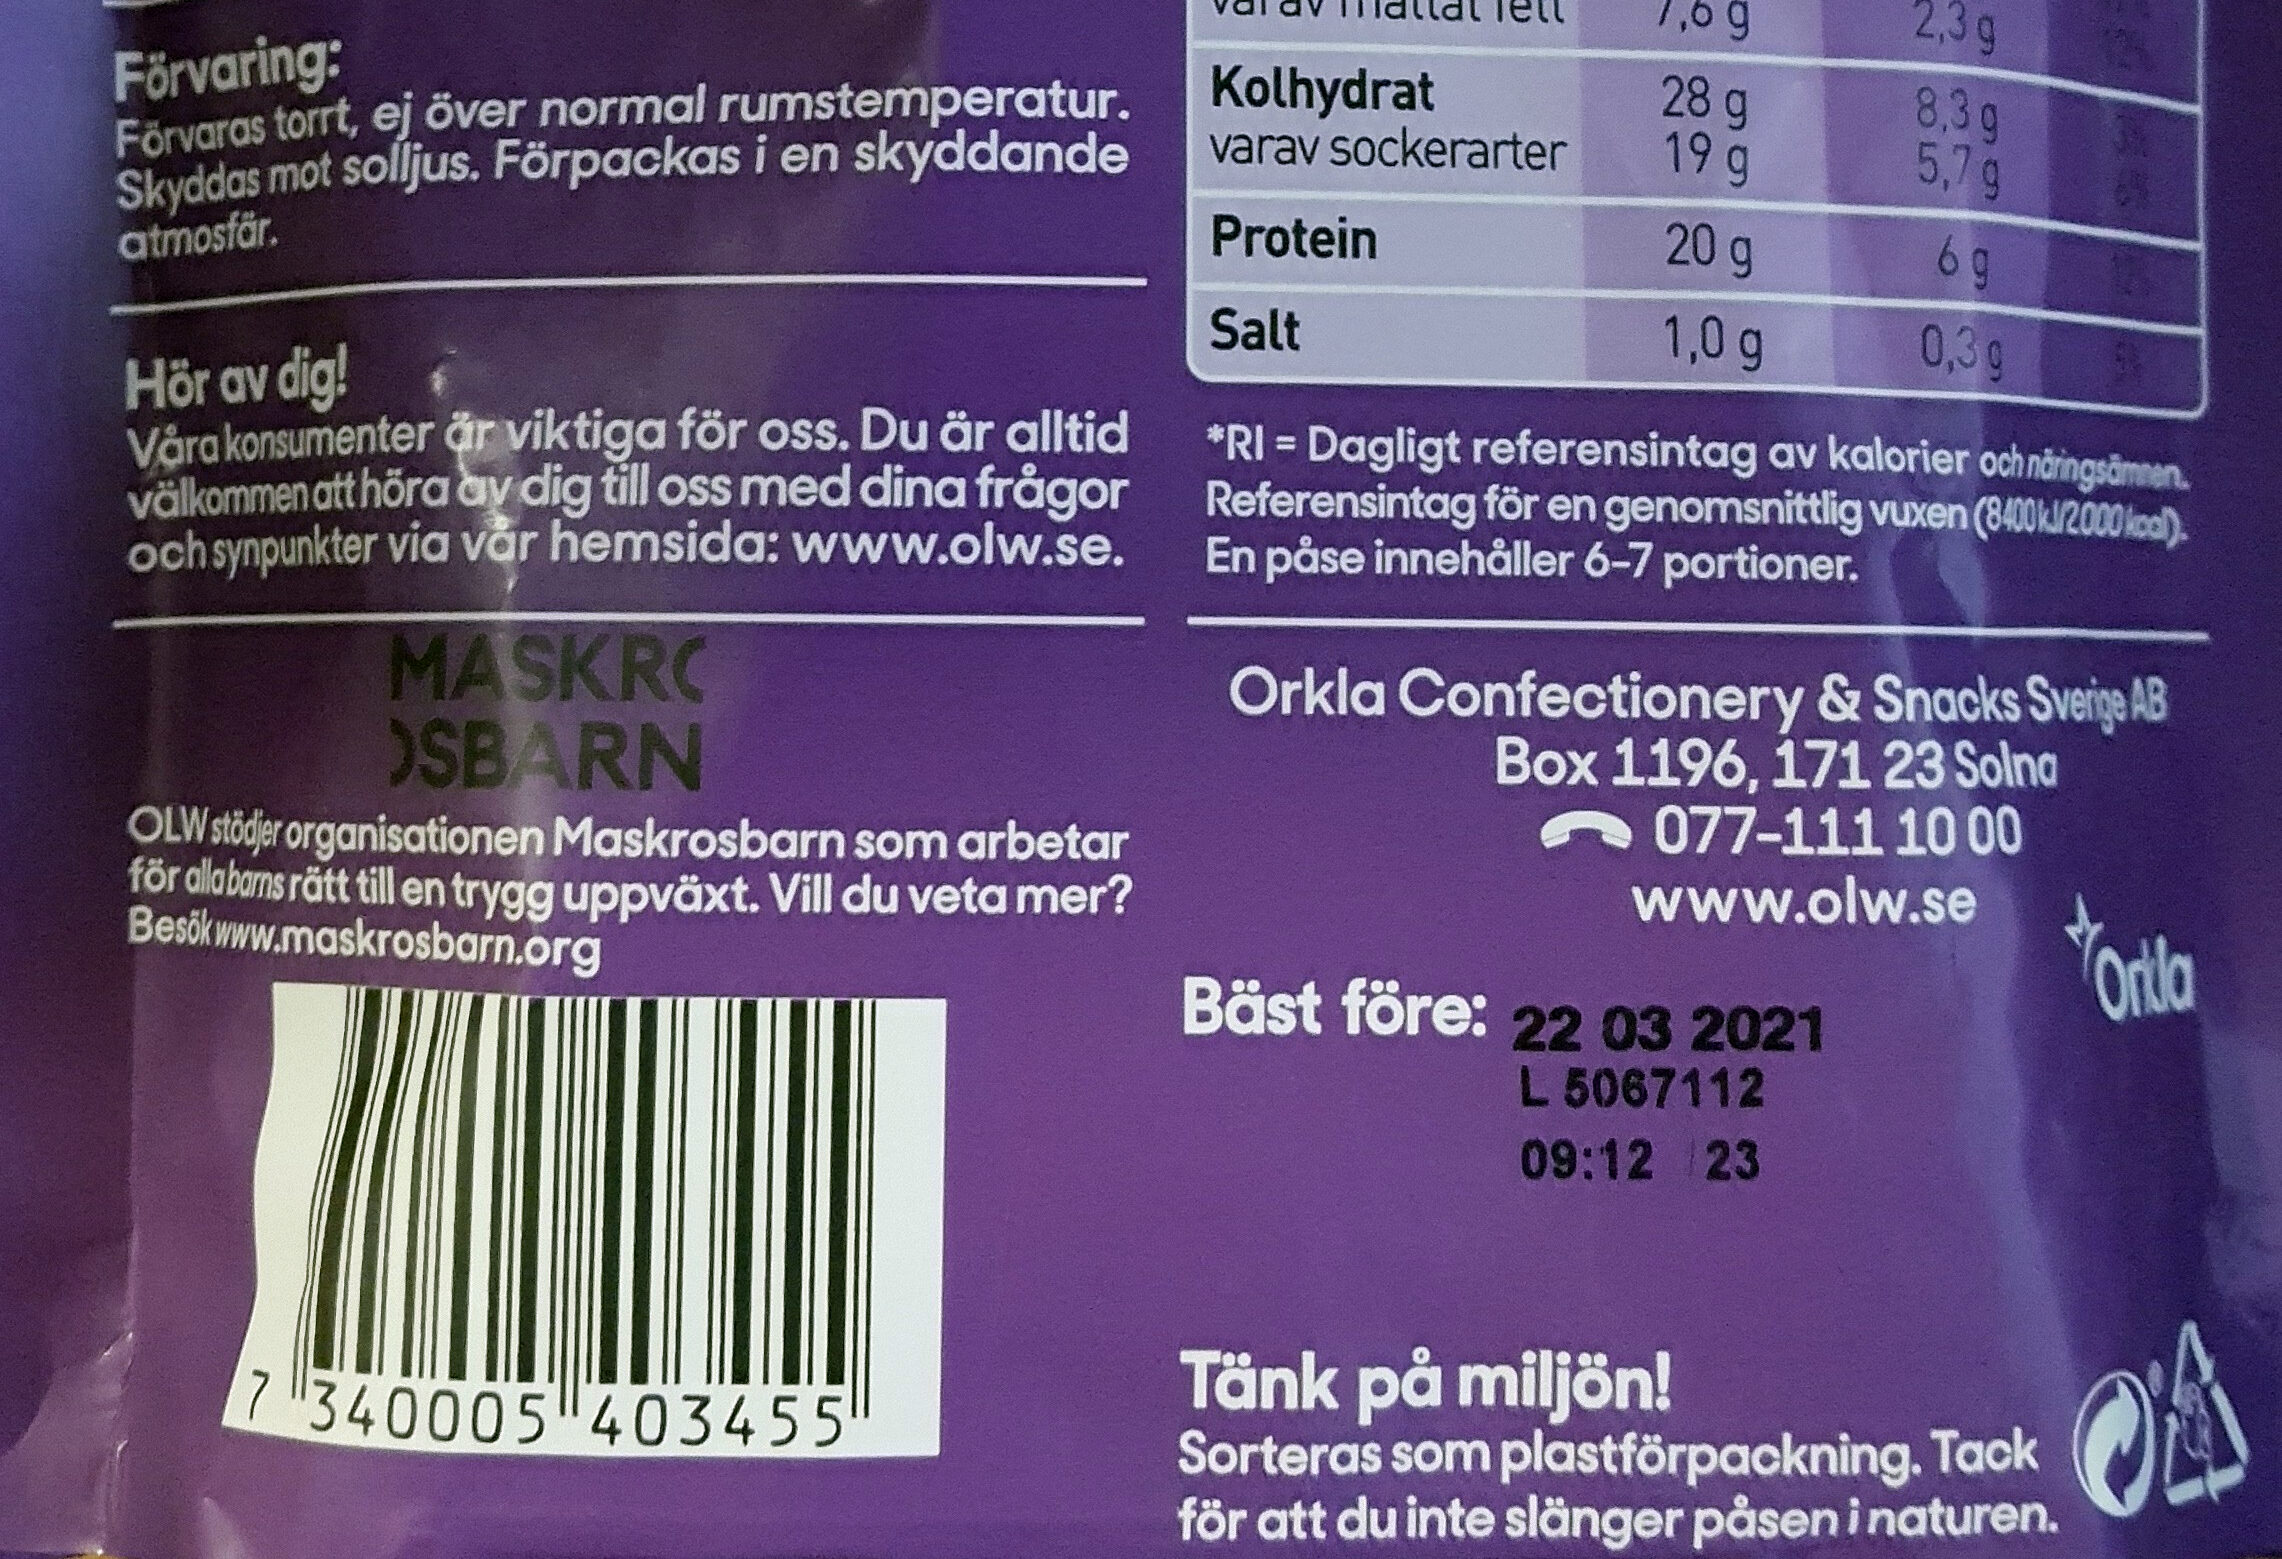 Nöt Mix - Bär - Recycling instructions and/or packaging information